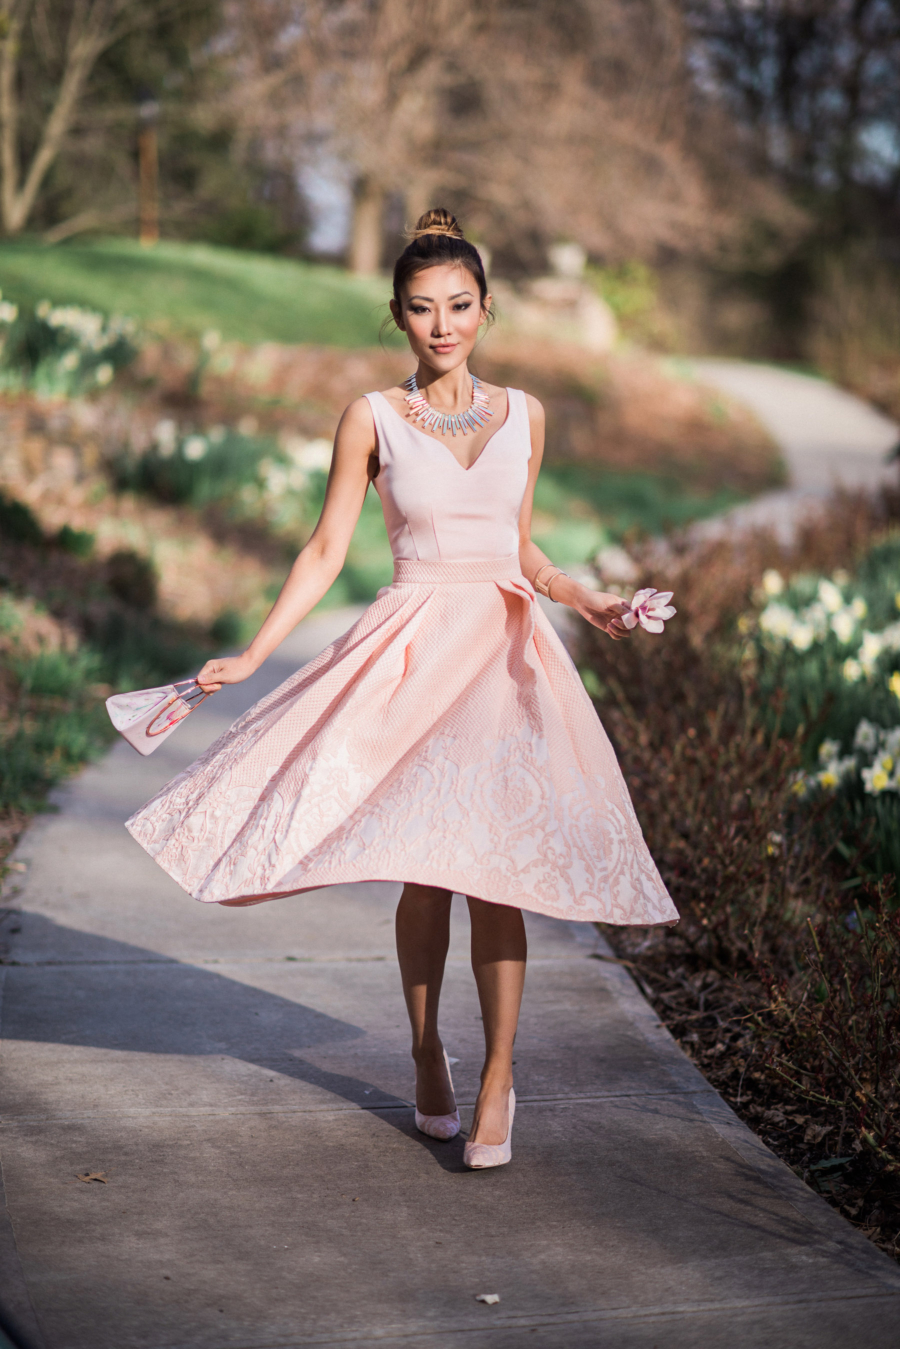 How to pick the perfect wedding dress, pink a-line dress // Notjessfashion.com